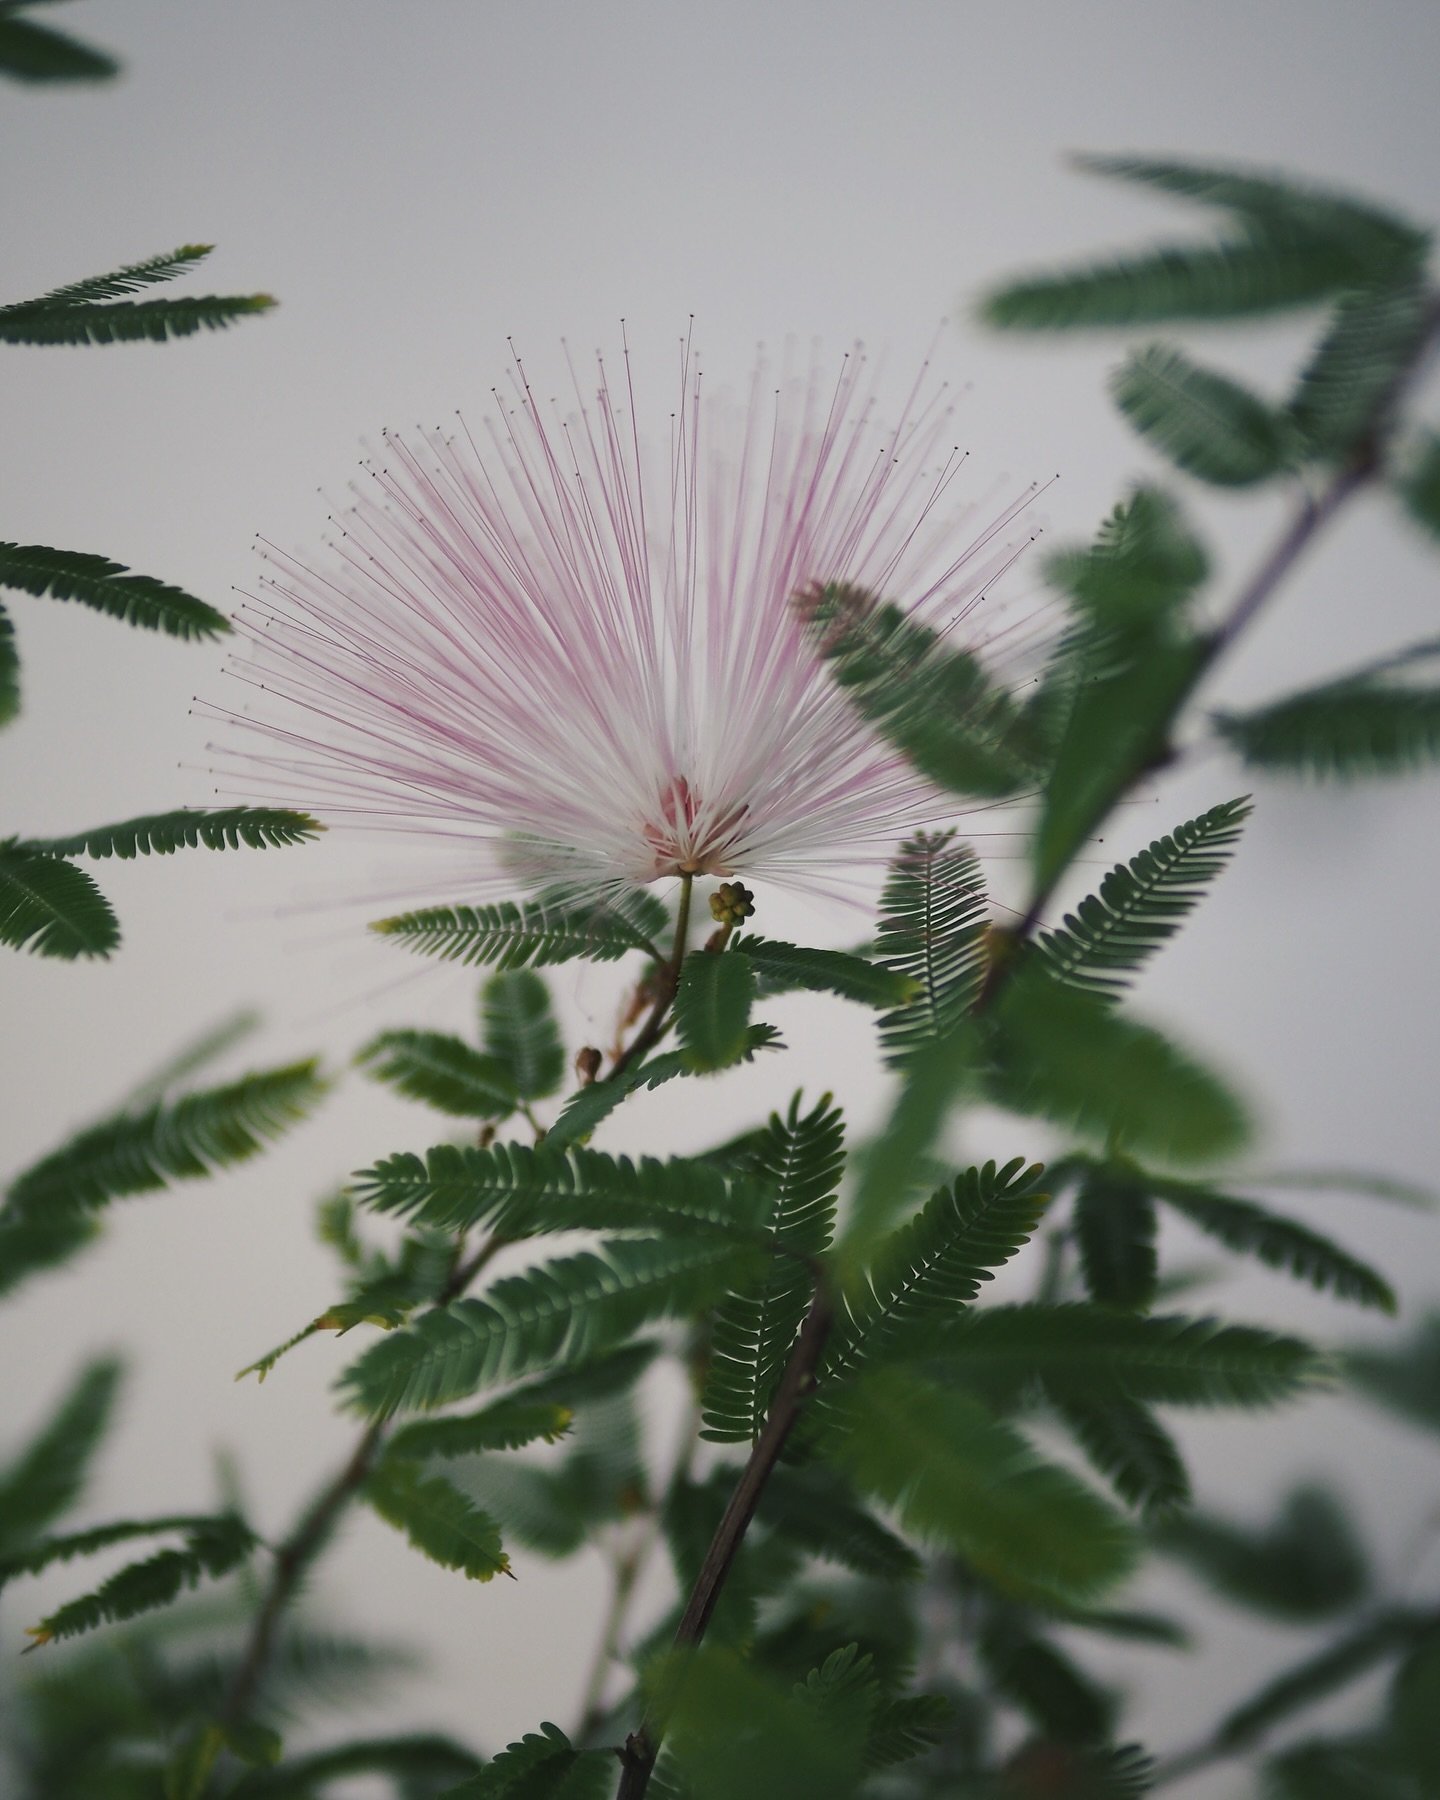 Already seen this Albizia Julibrissin? Find its pink fluff now in Utrecht. We can&rsquo;t get enough of its look! How do you like it? 💕